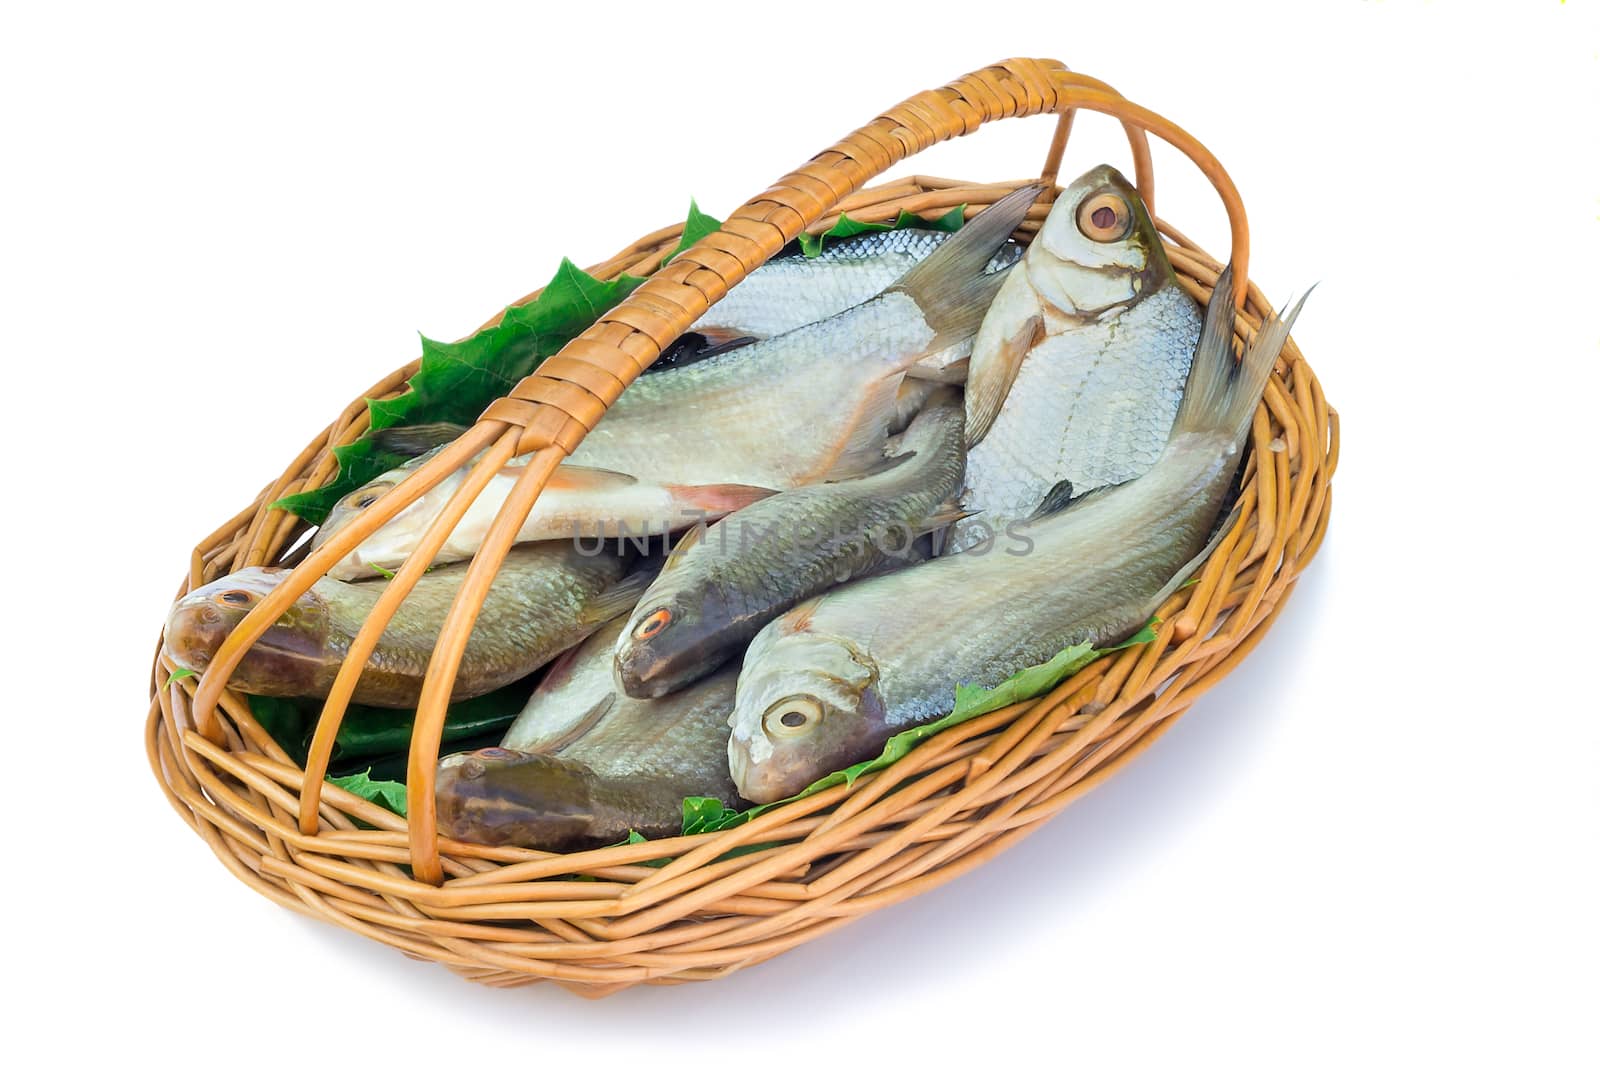 In a small wattled basket there is fish hooked in the river.
It is presented on a white background.